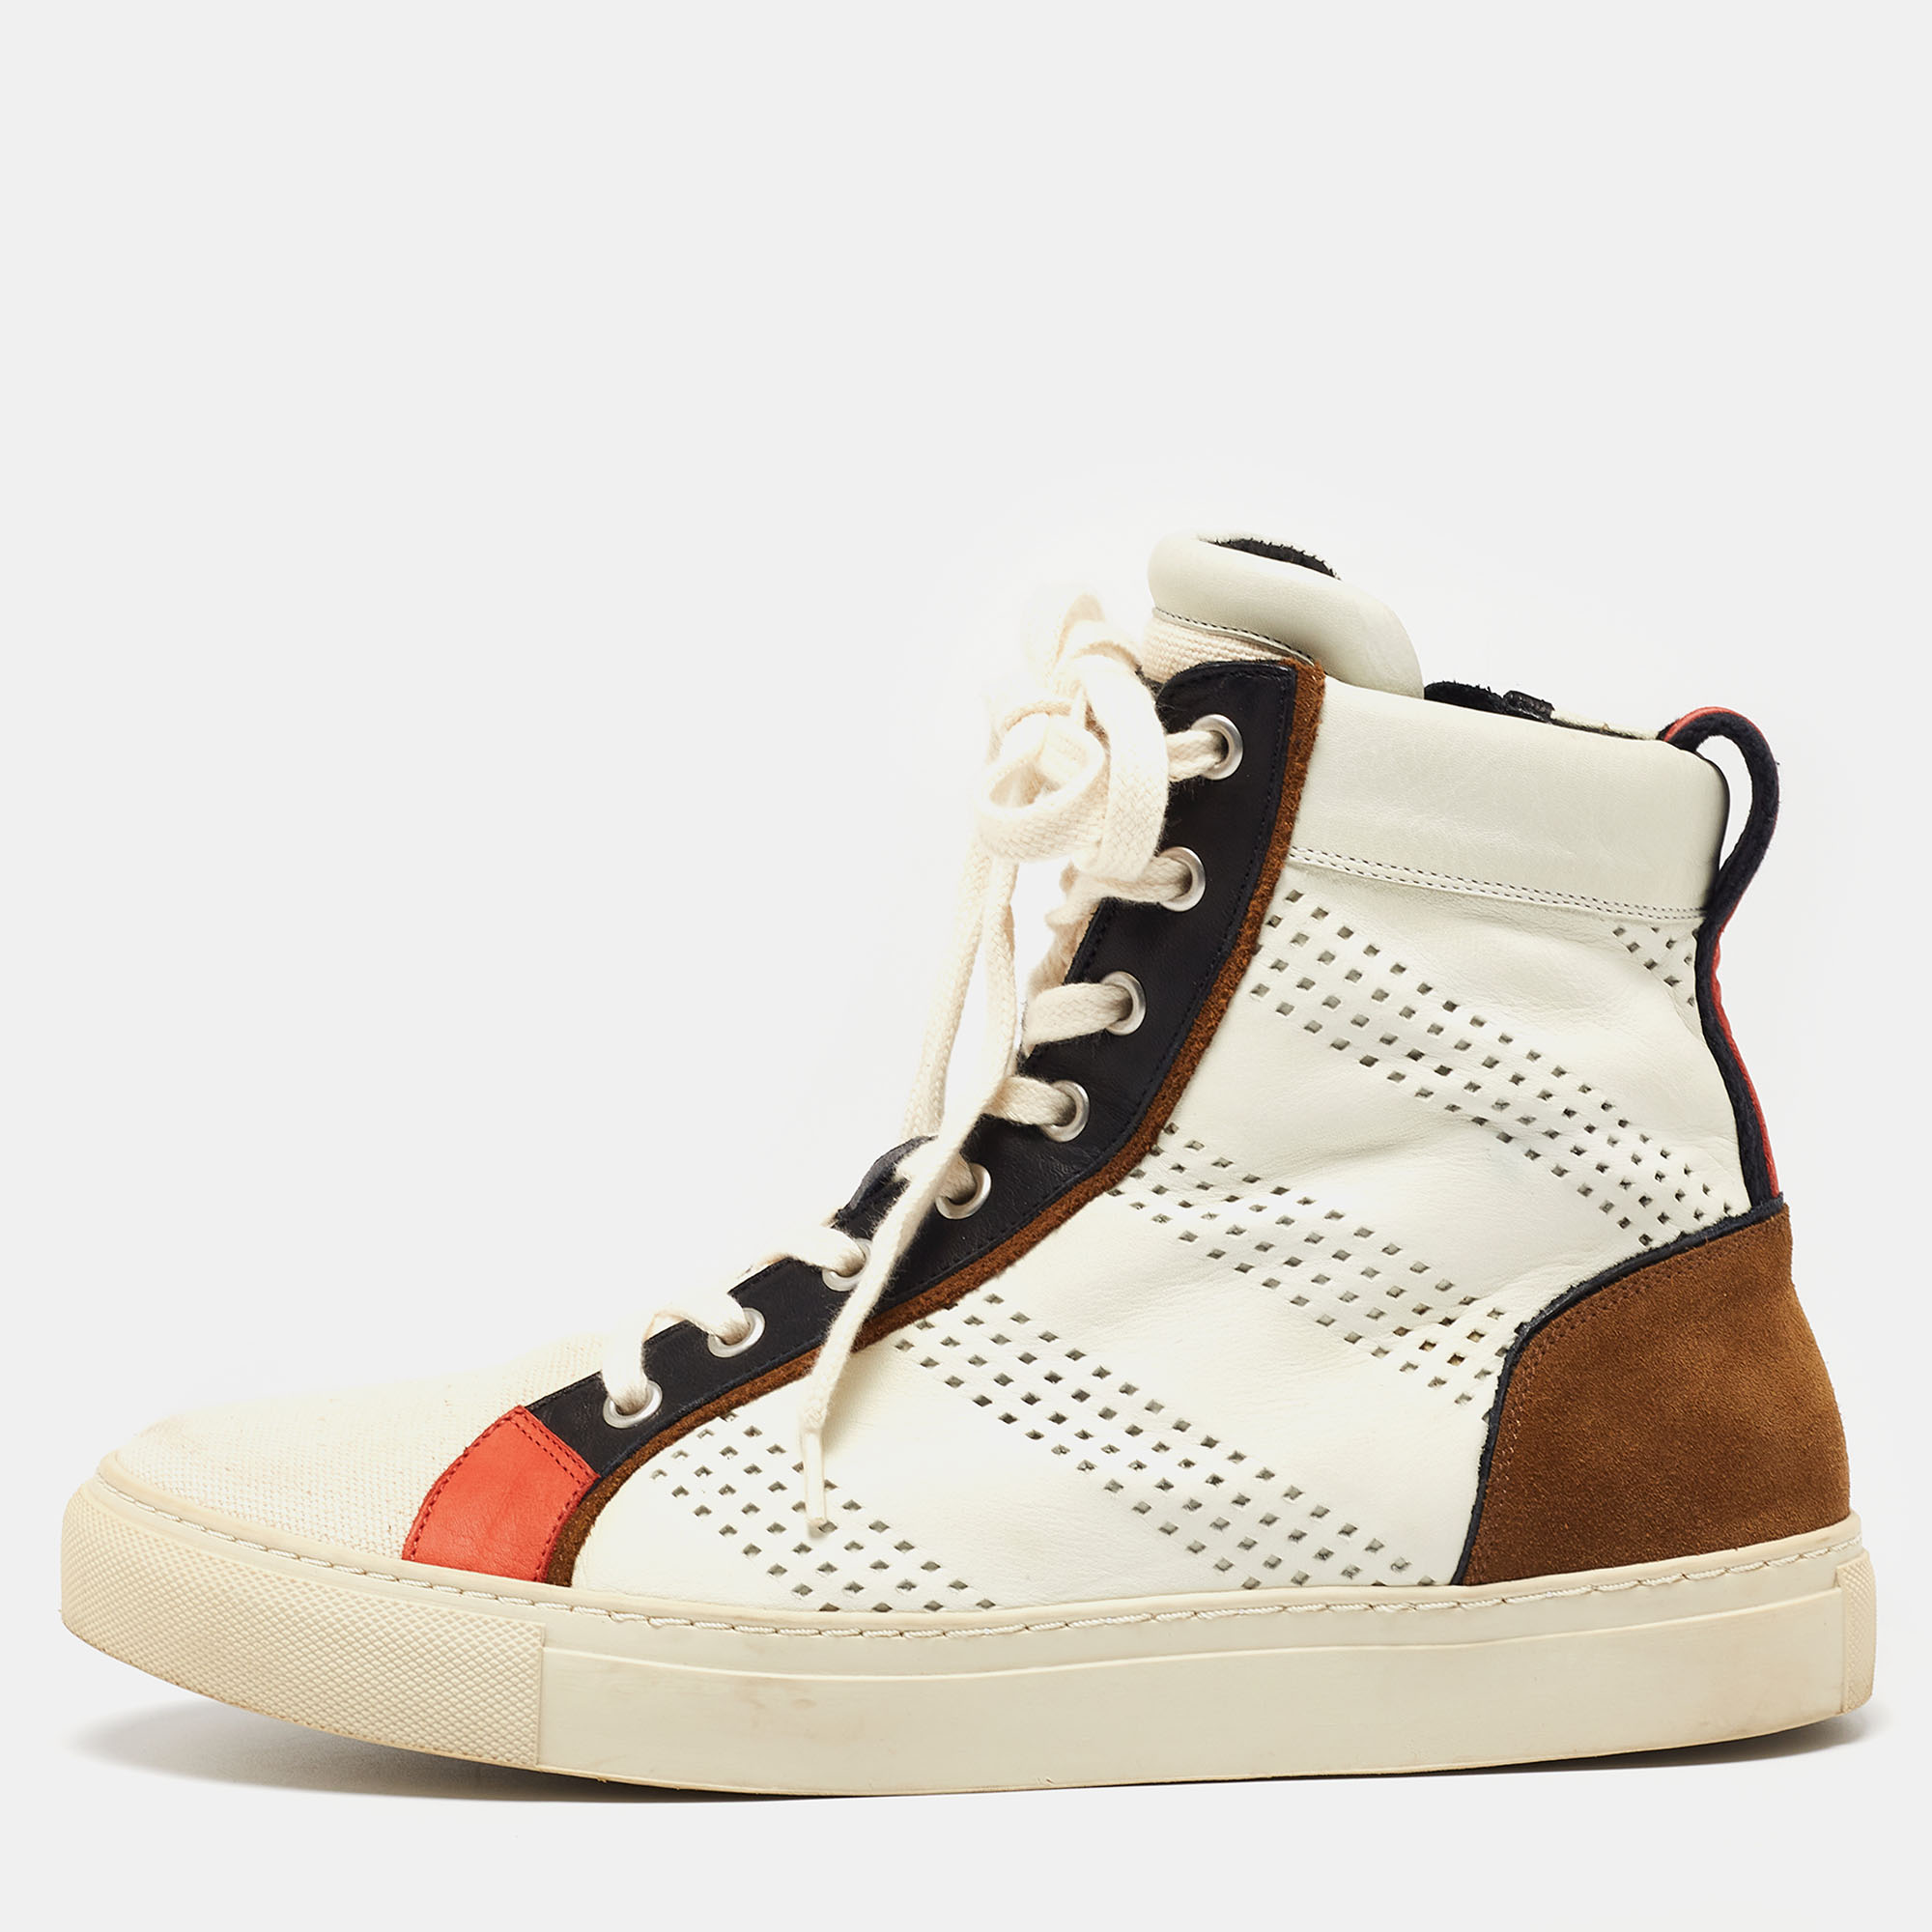 Pre-owned Balmain Multicolor Perforated Leather Suede And Canvas High-top Sneakers Size 42